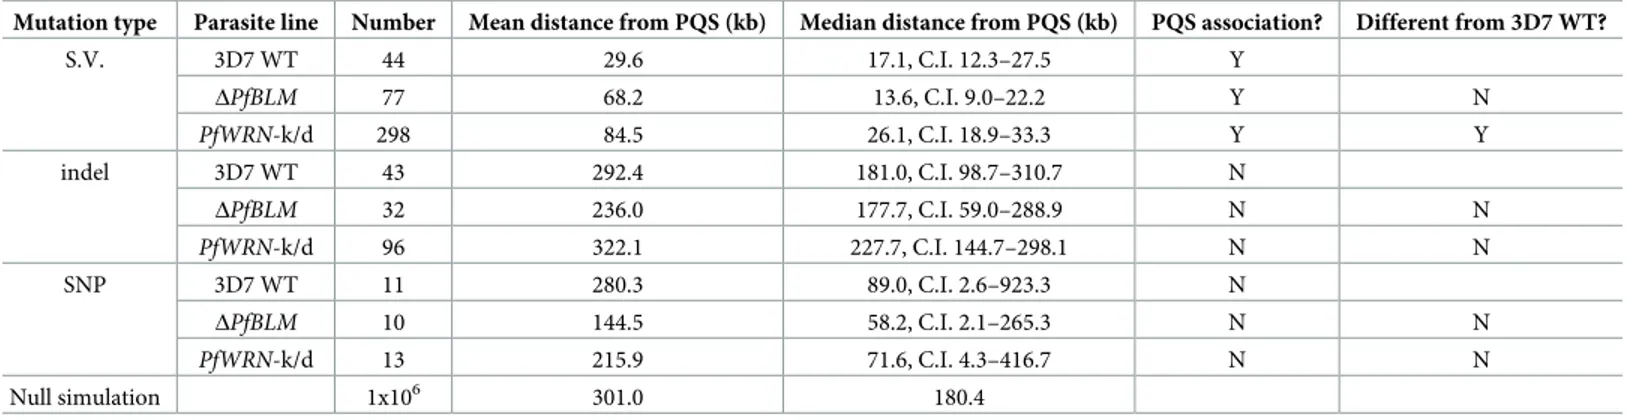 Table 1. Analysis of association between mutation events and PQSs.